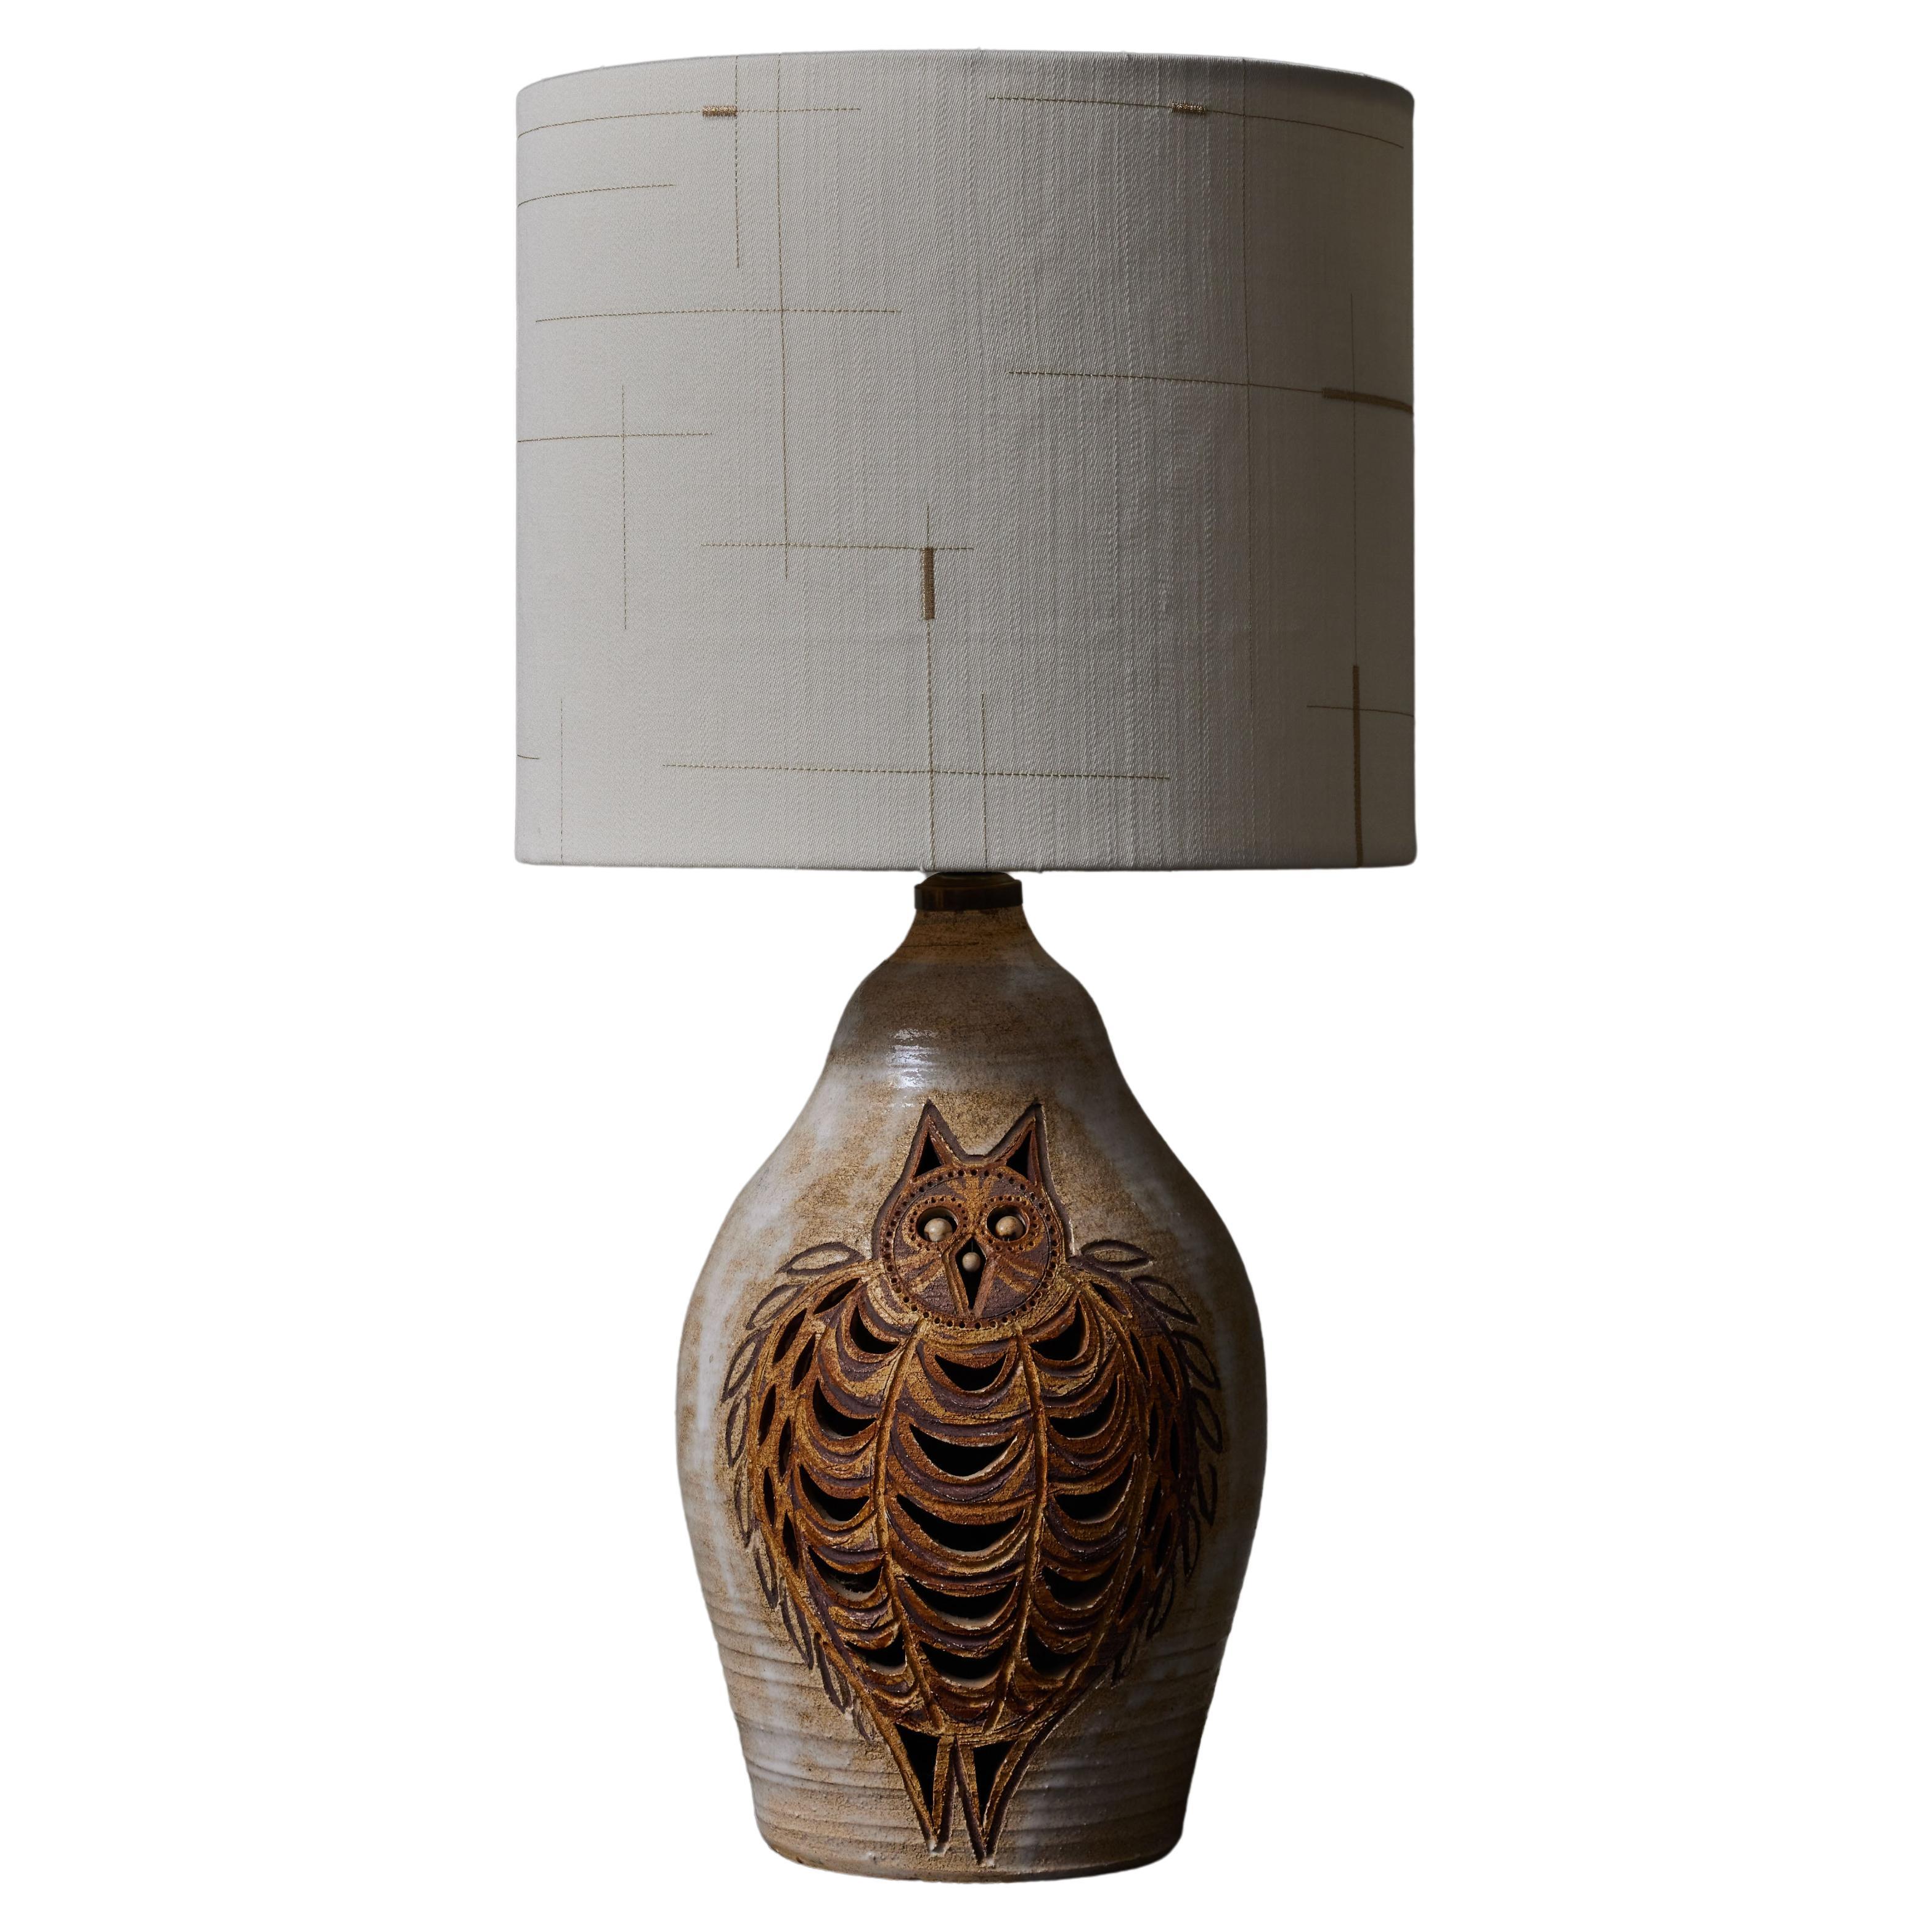 Georges Pelletier Ceramic Table Lamp With Owl Decor